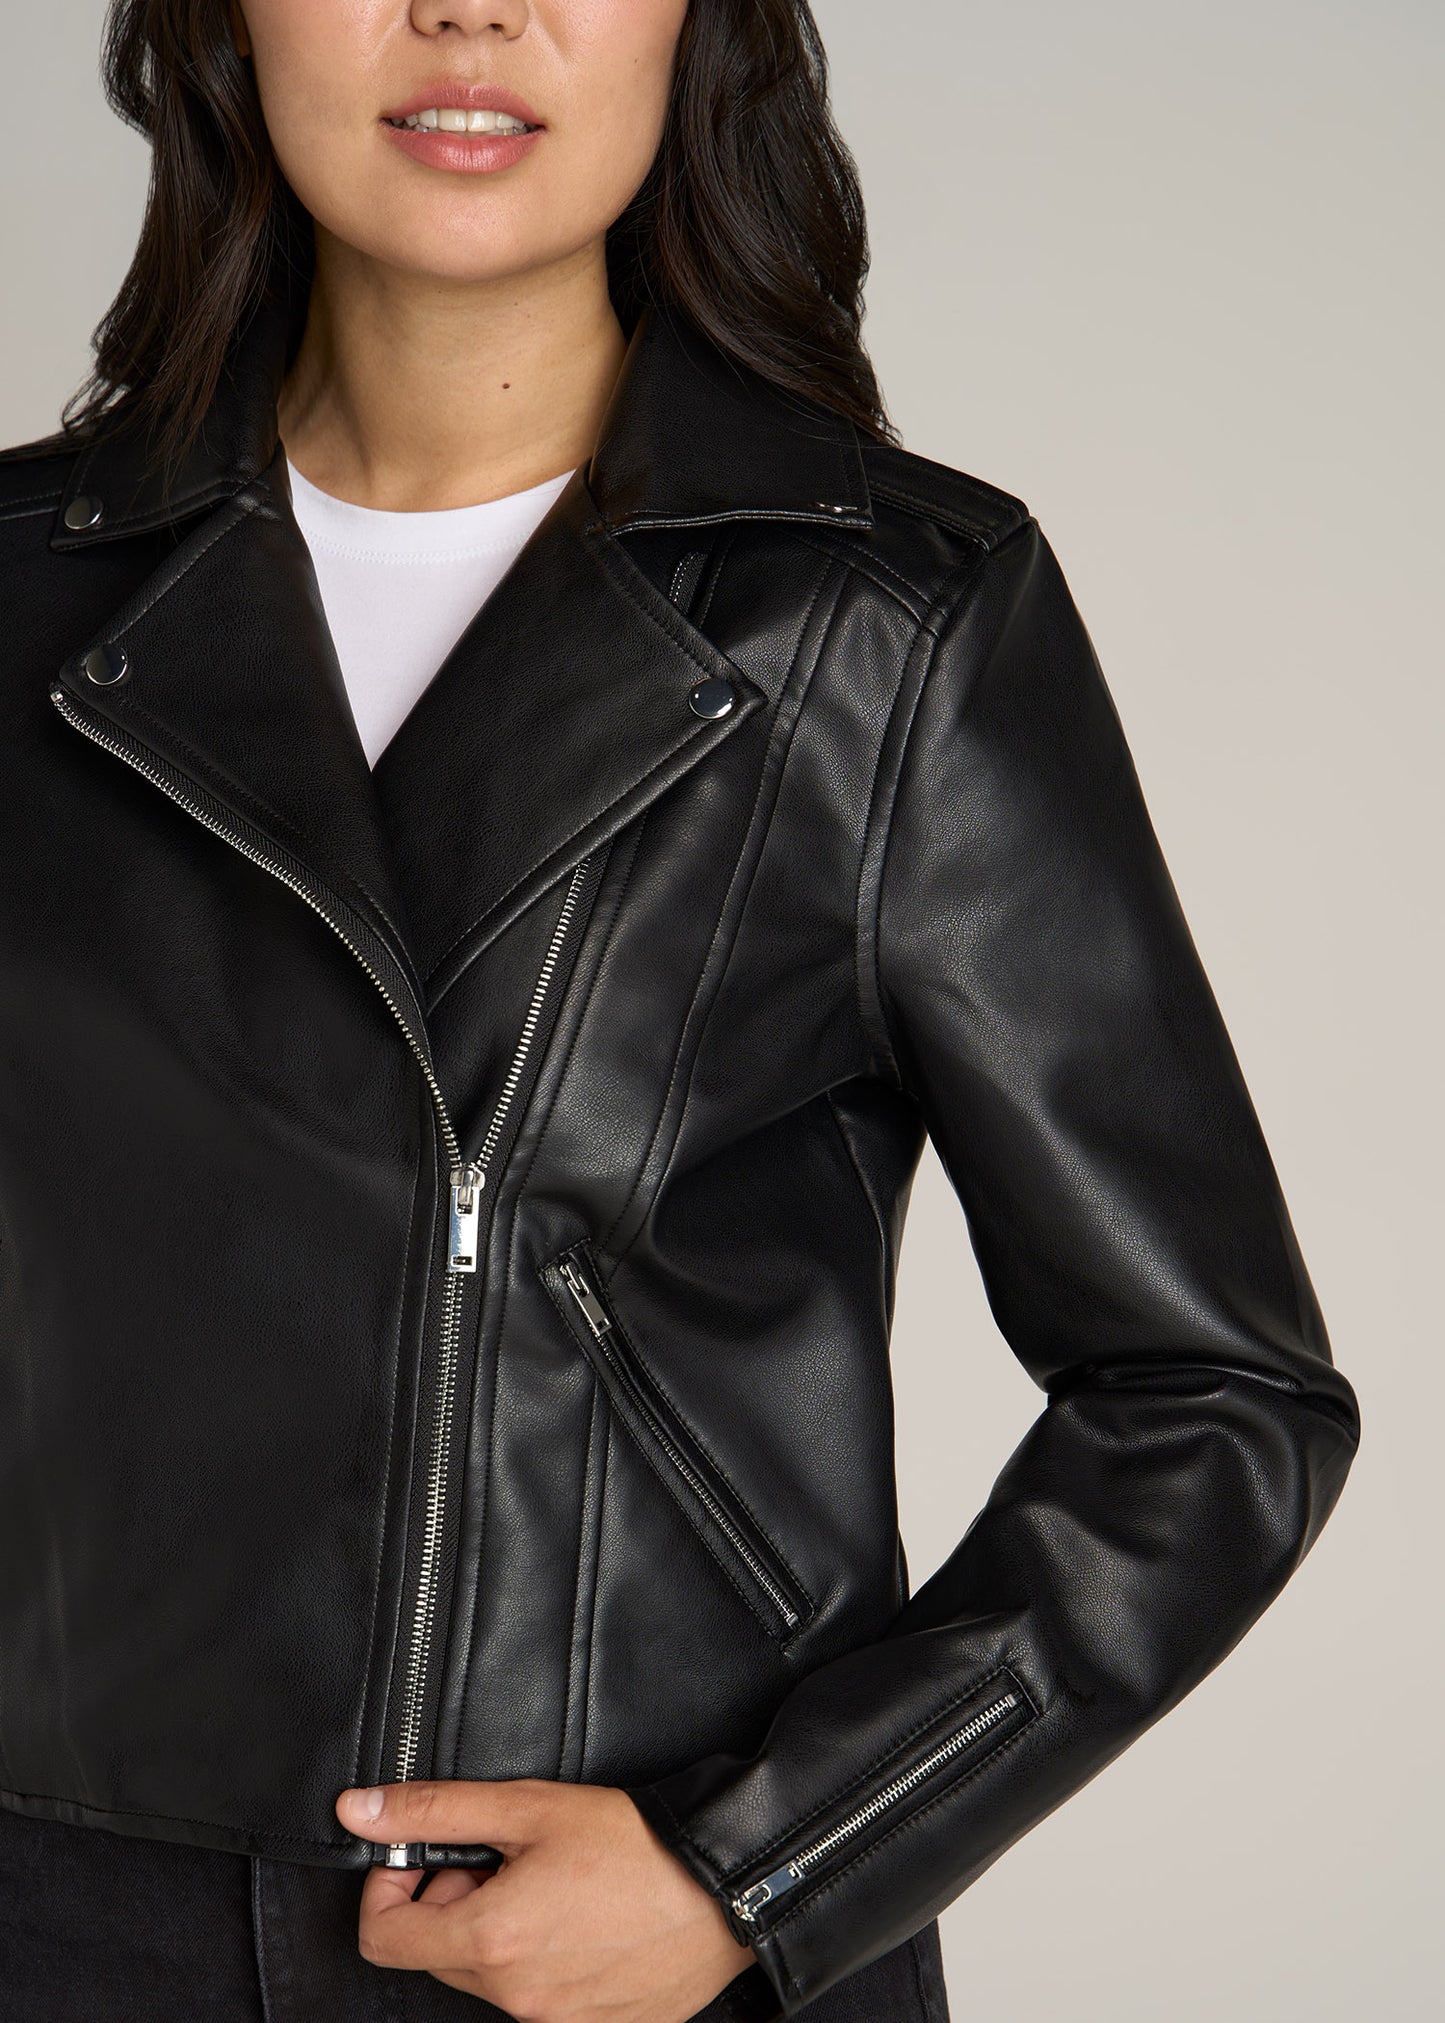 Tall Womens Black Leather Jacket with Removable Hood